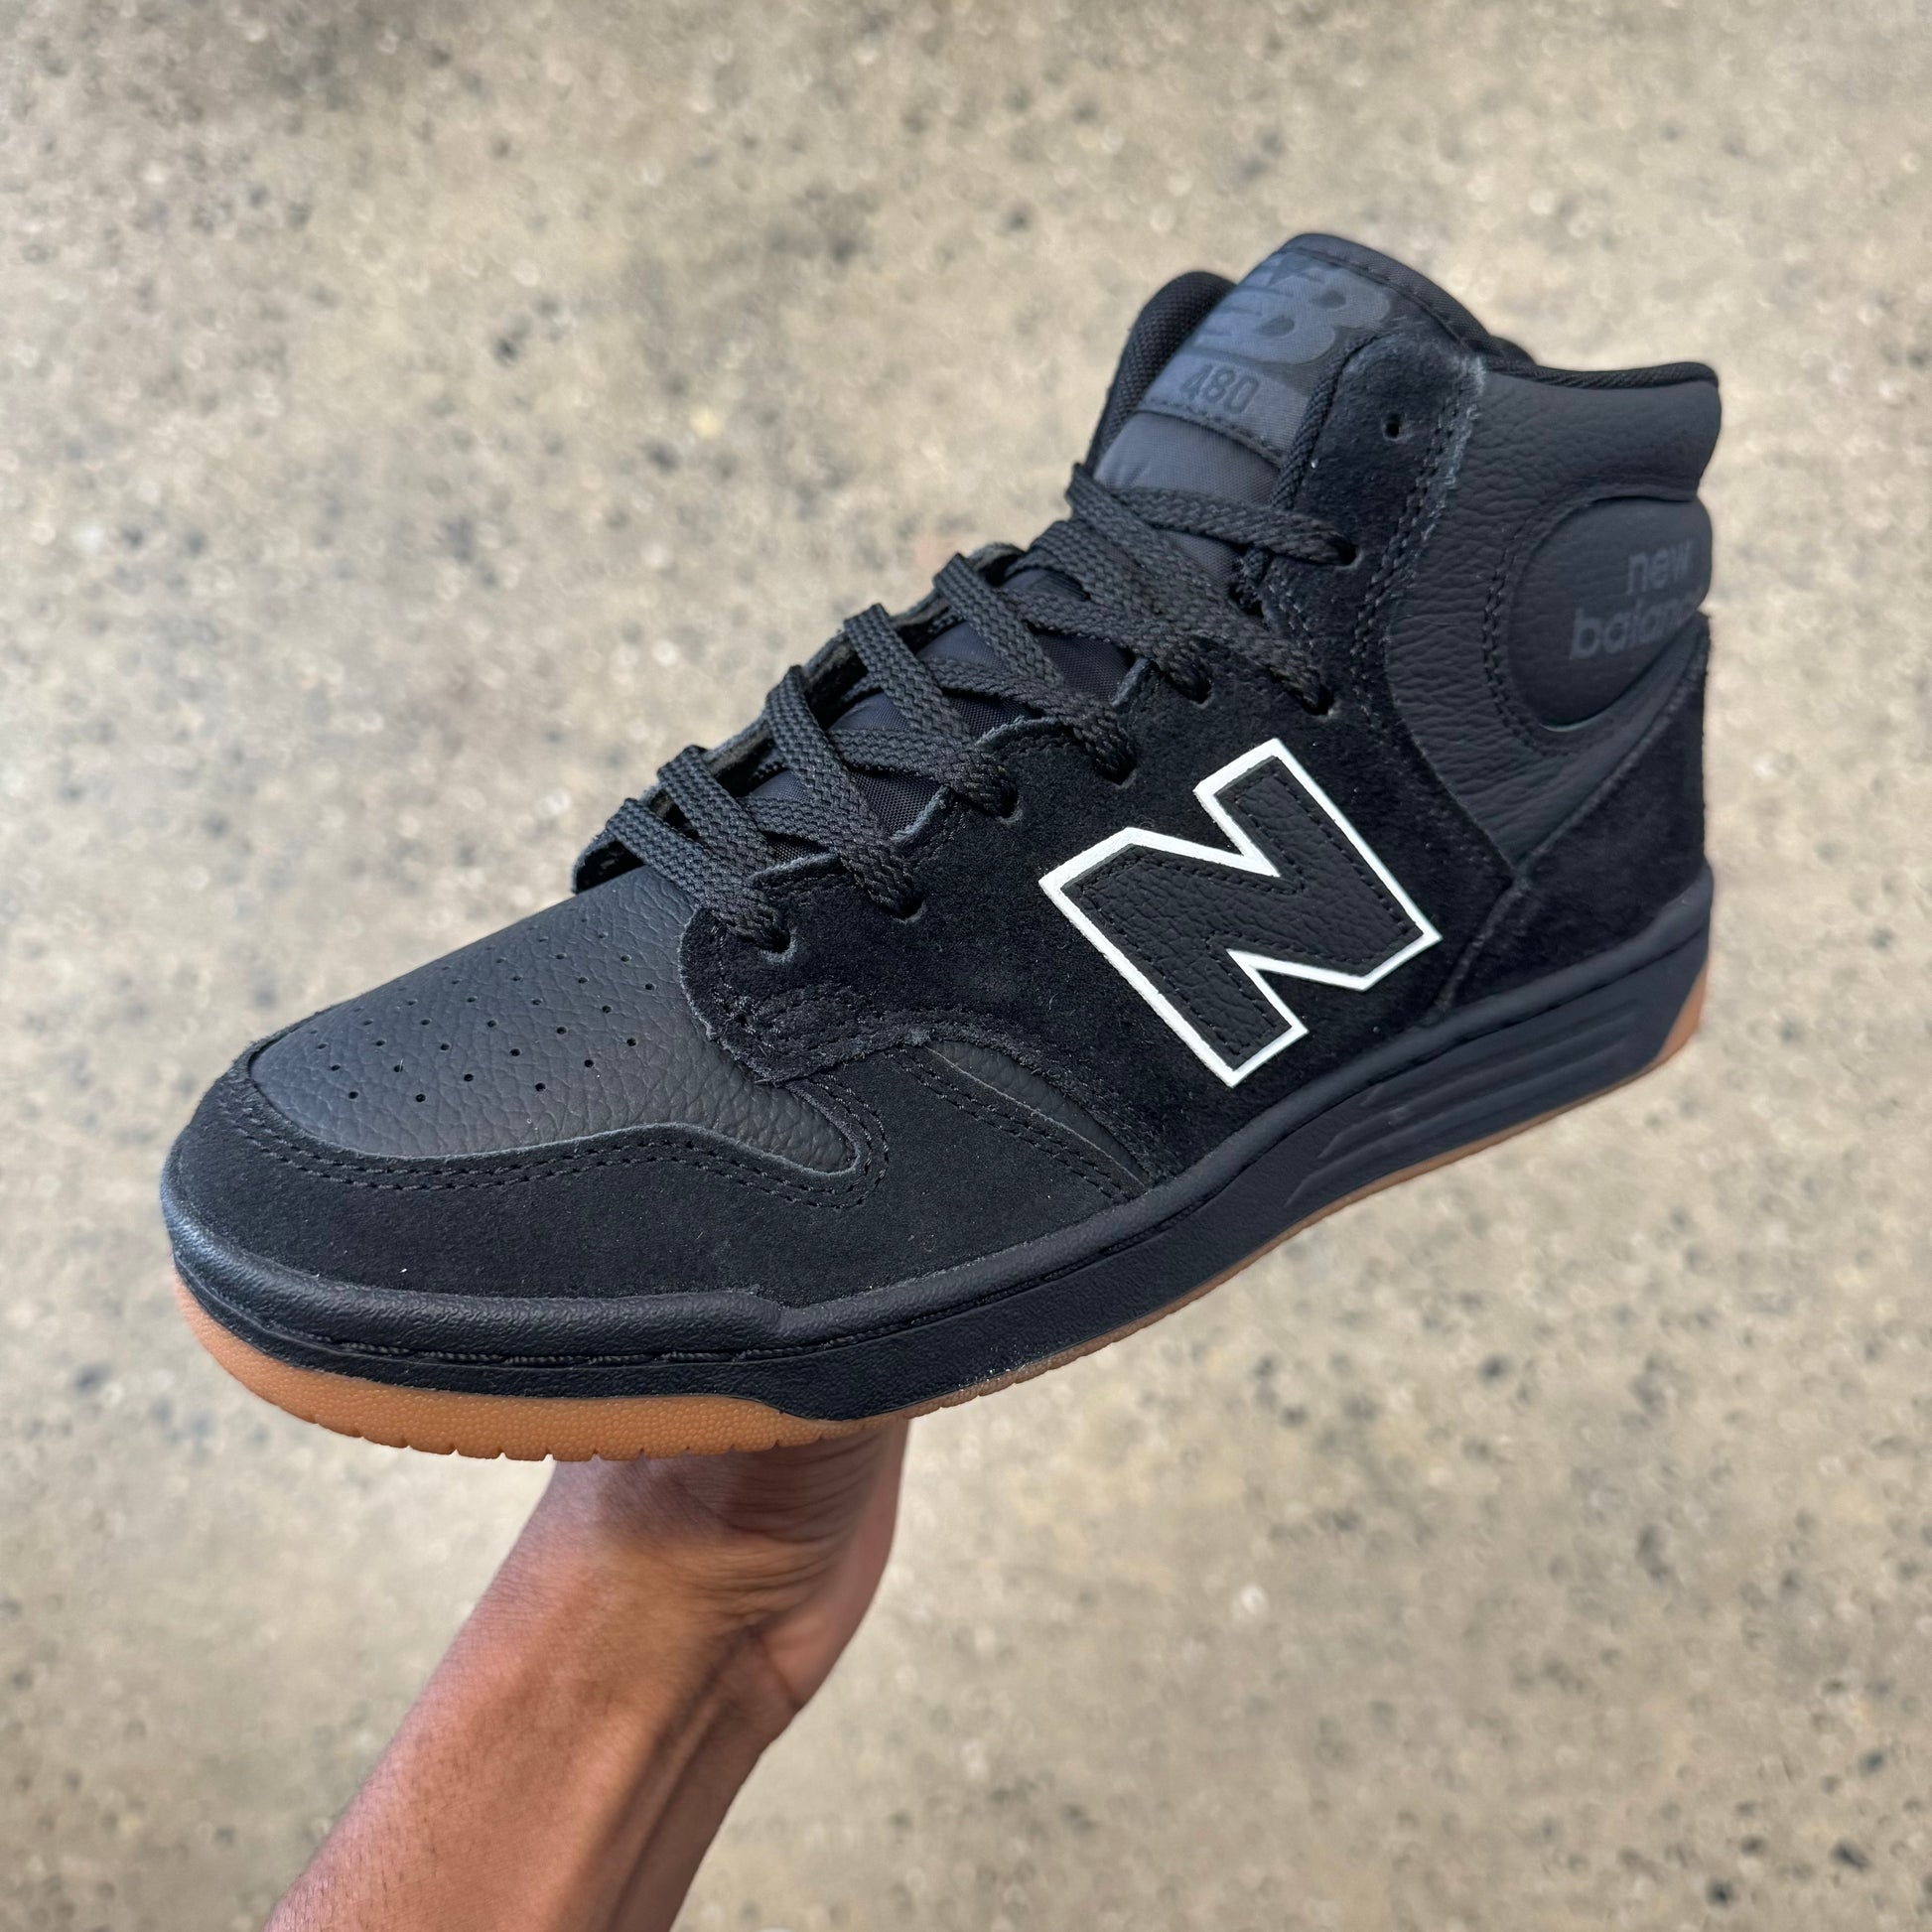 black suede high top shoe with white accent around the new balance logo and gum outsole